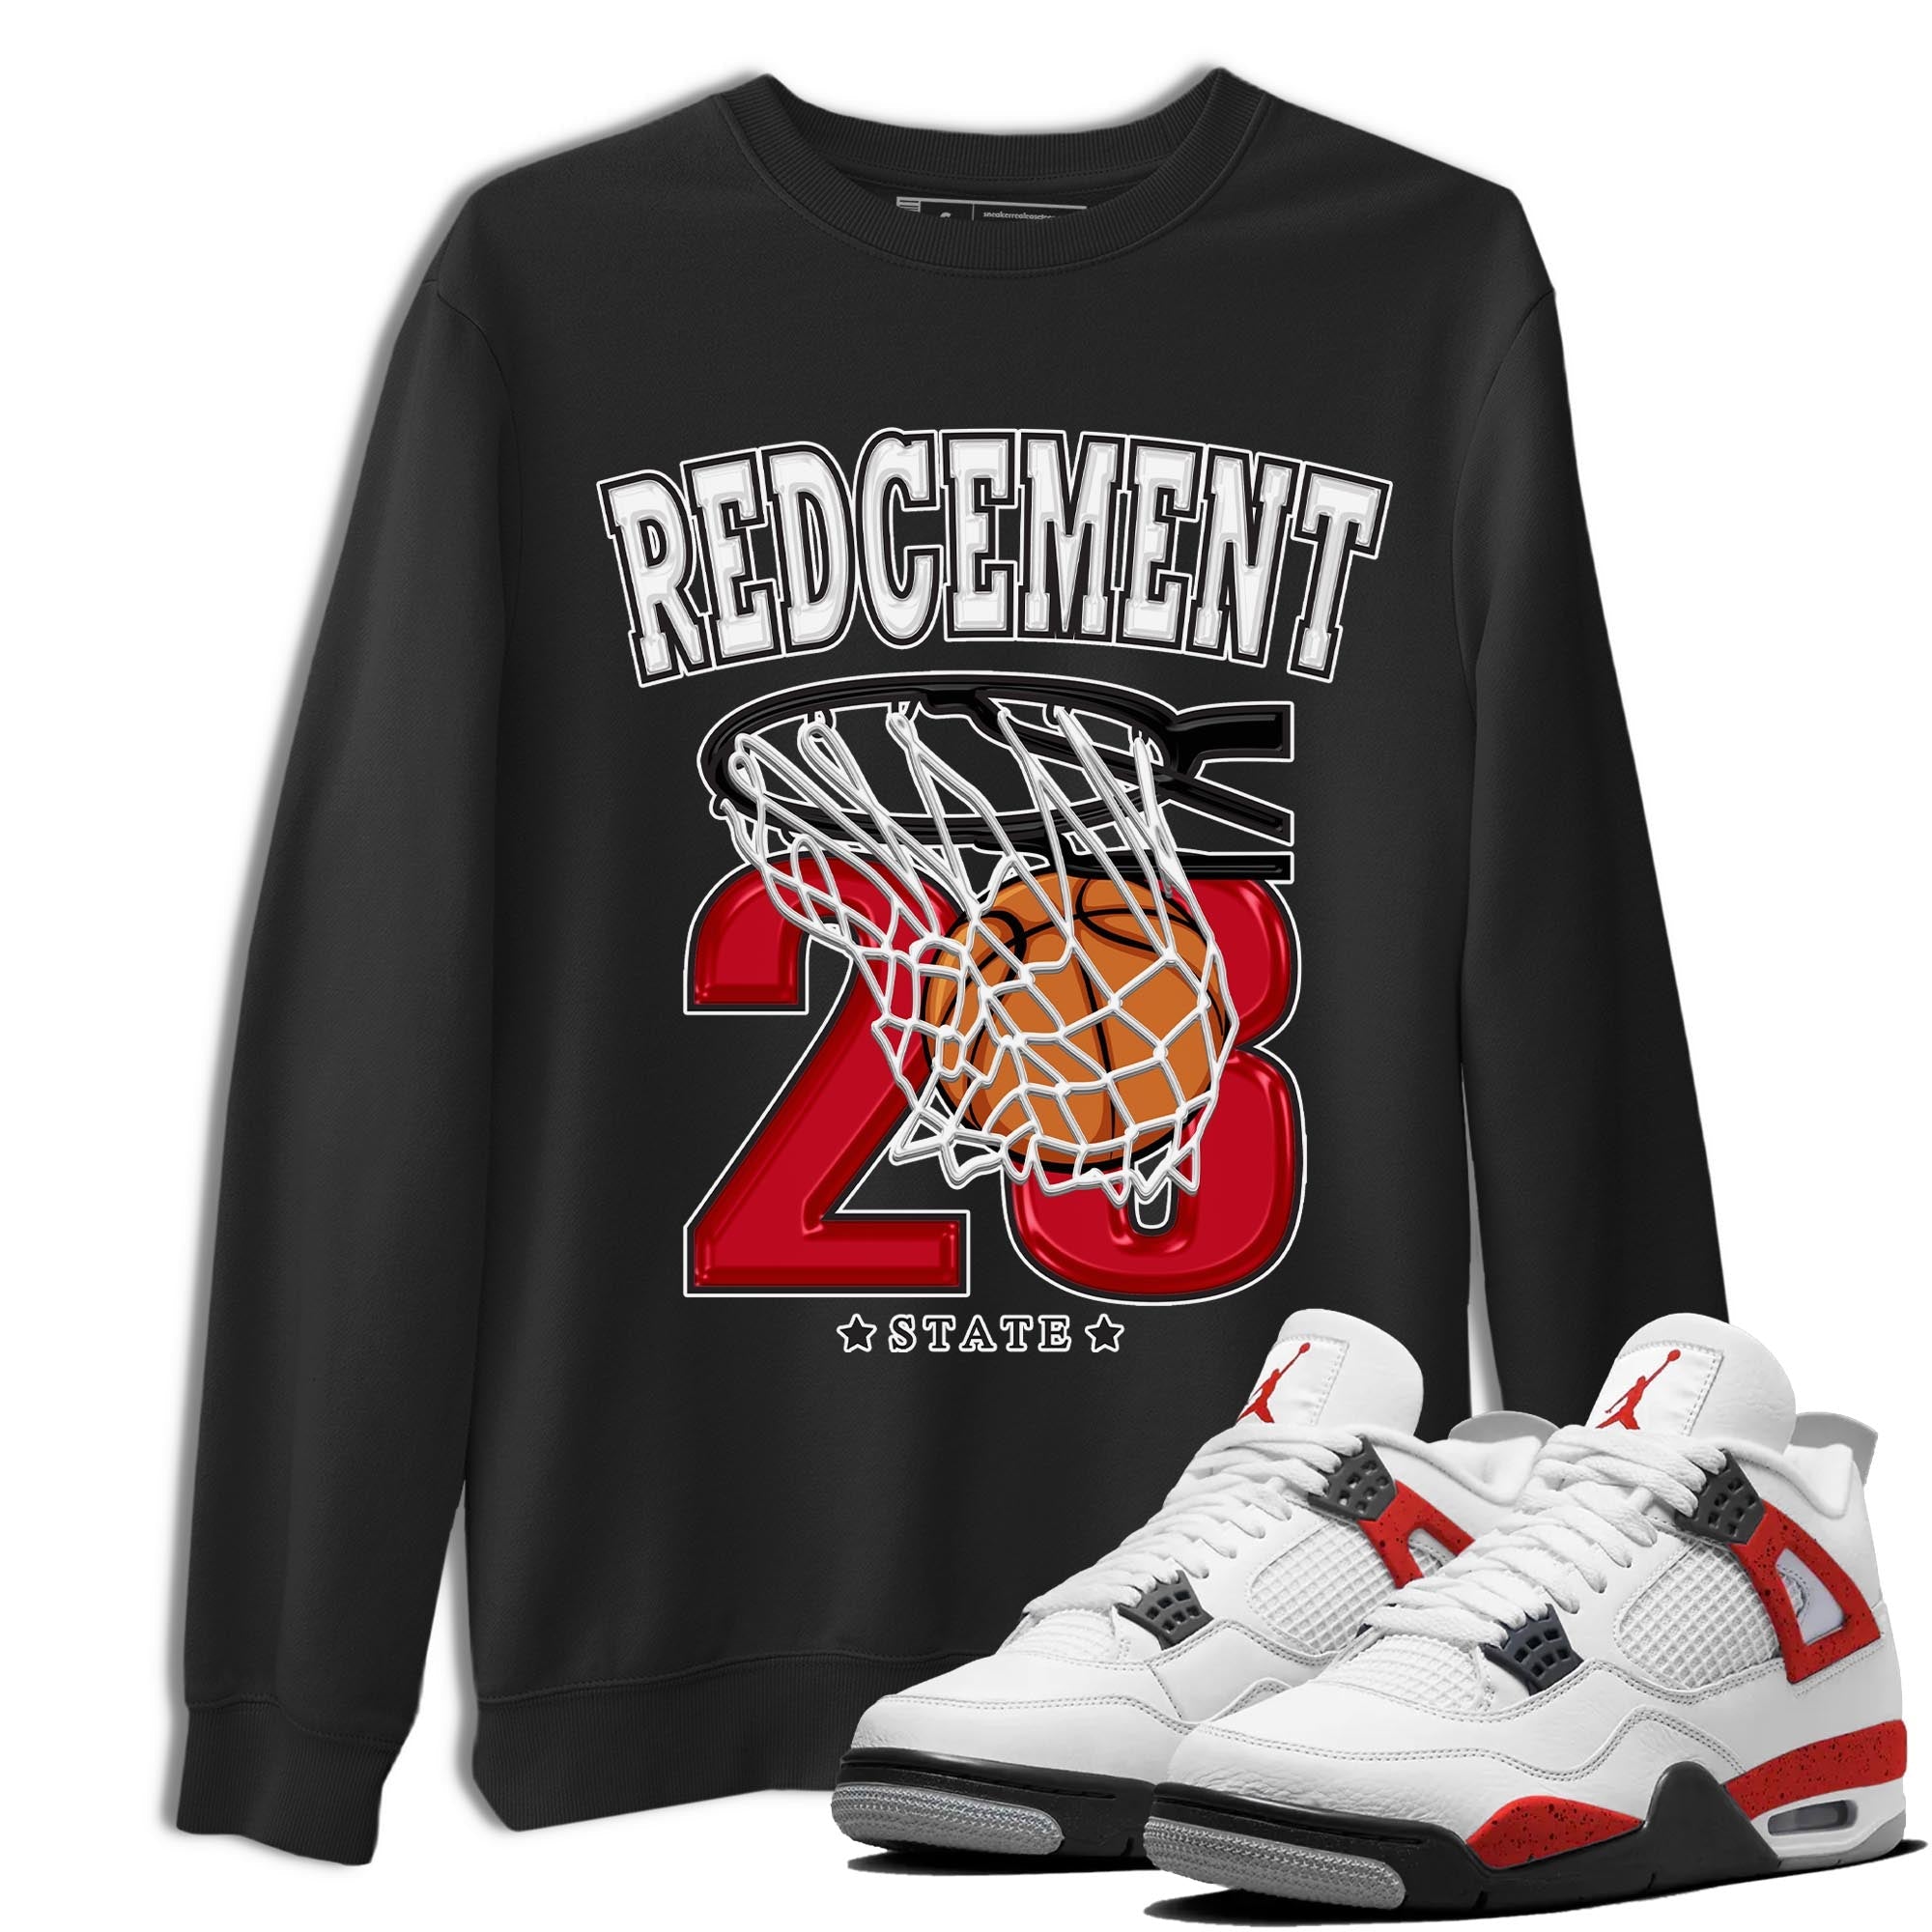 Jordan 4 Red Cement Varsity Jacket, Shirt for Sneakerhead, Shoes Drip, Jacket to Match Retro 4S Red Cement